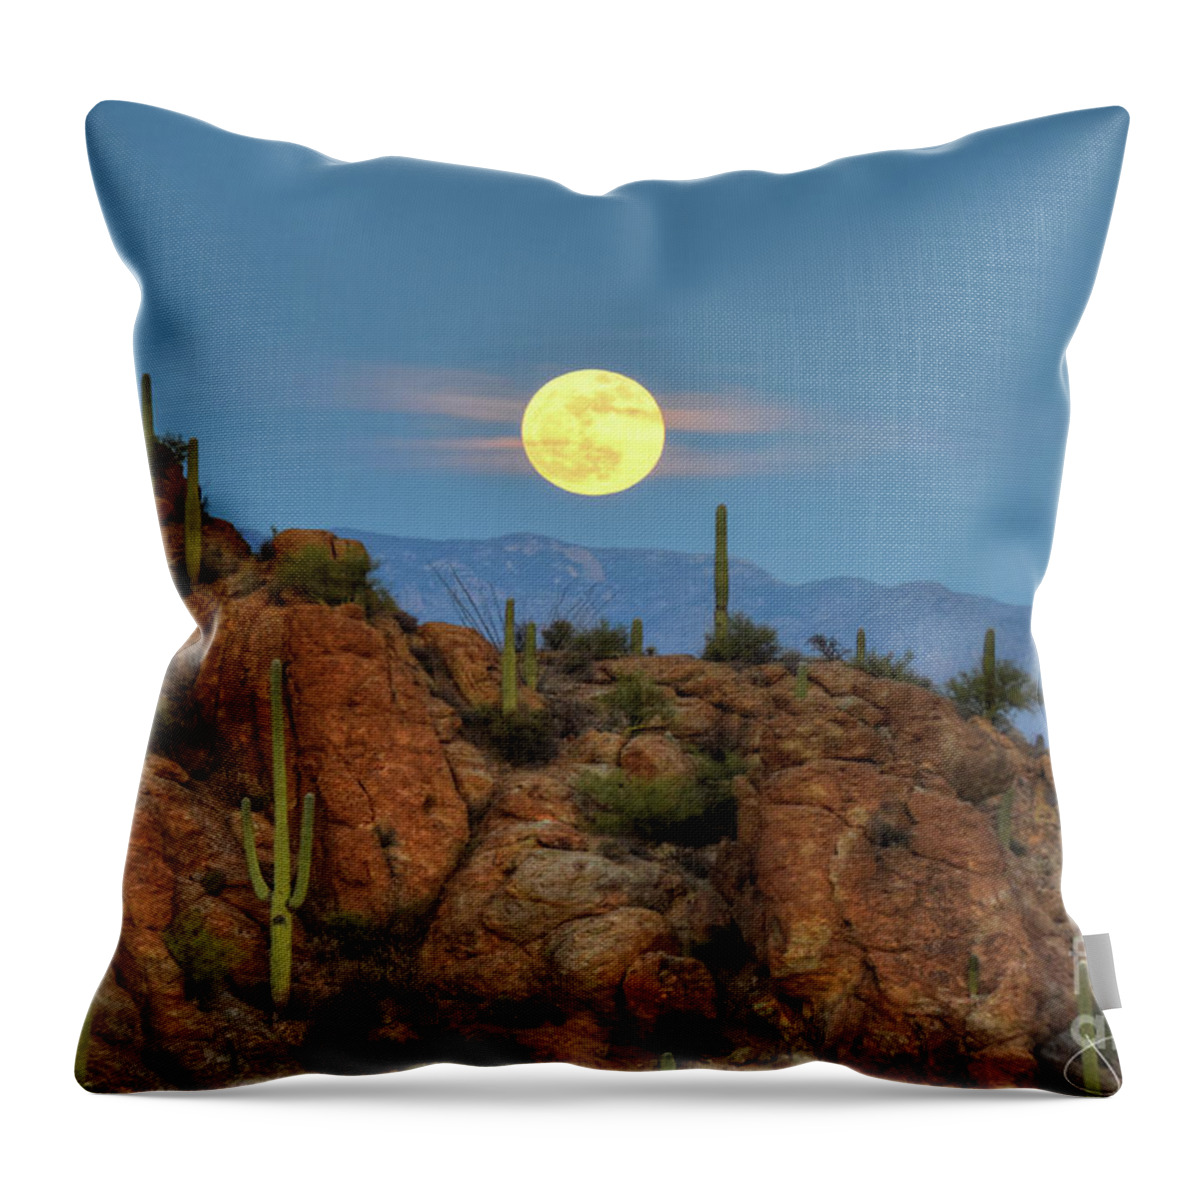 Supermoon Throw Pillow featuring the photograph Supermoon Rising Jan 2018 by Joanne West